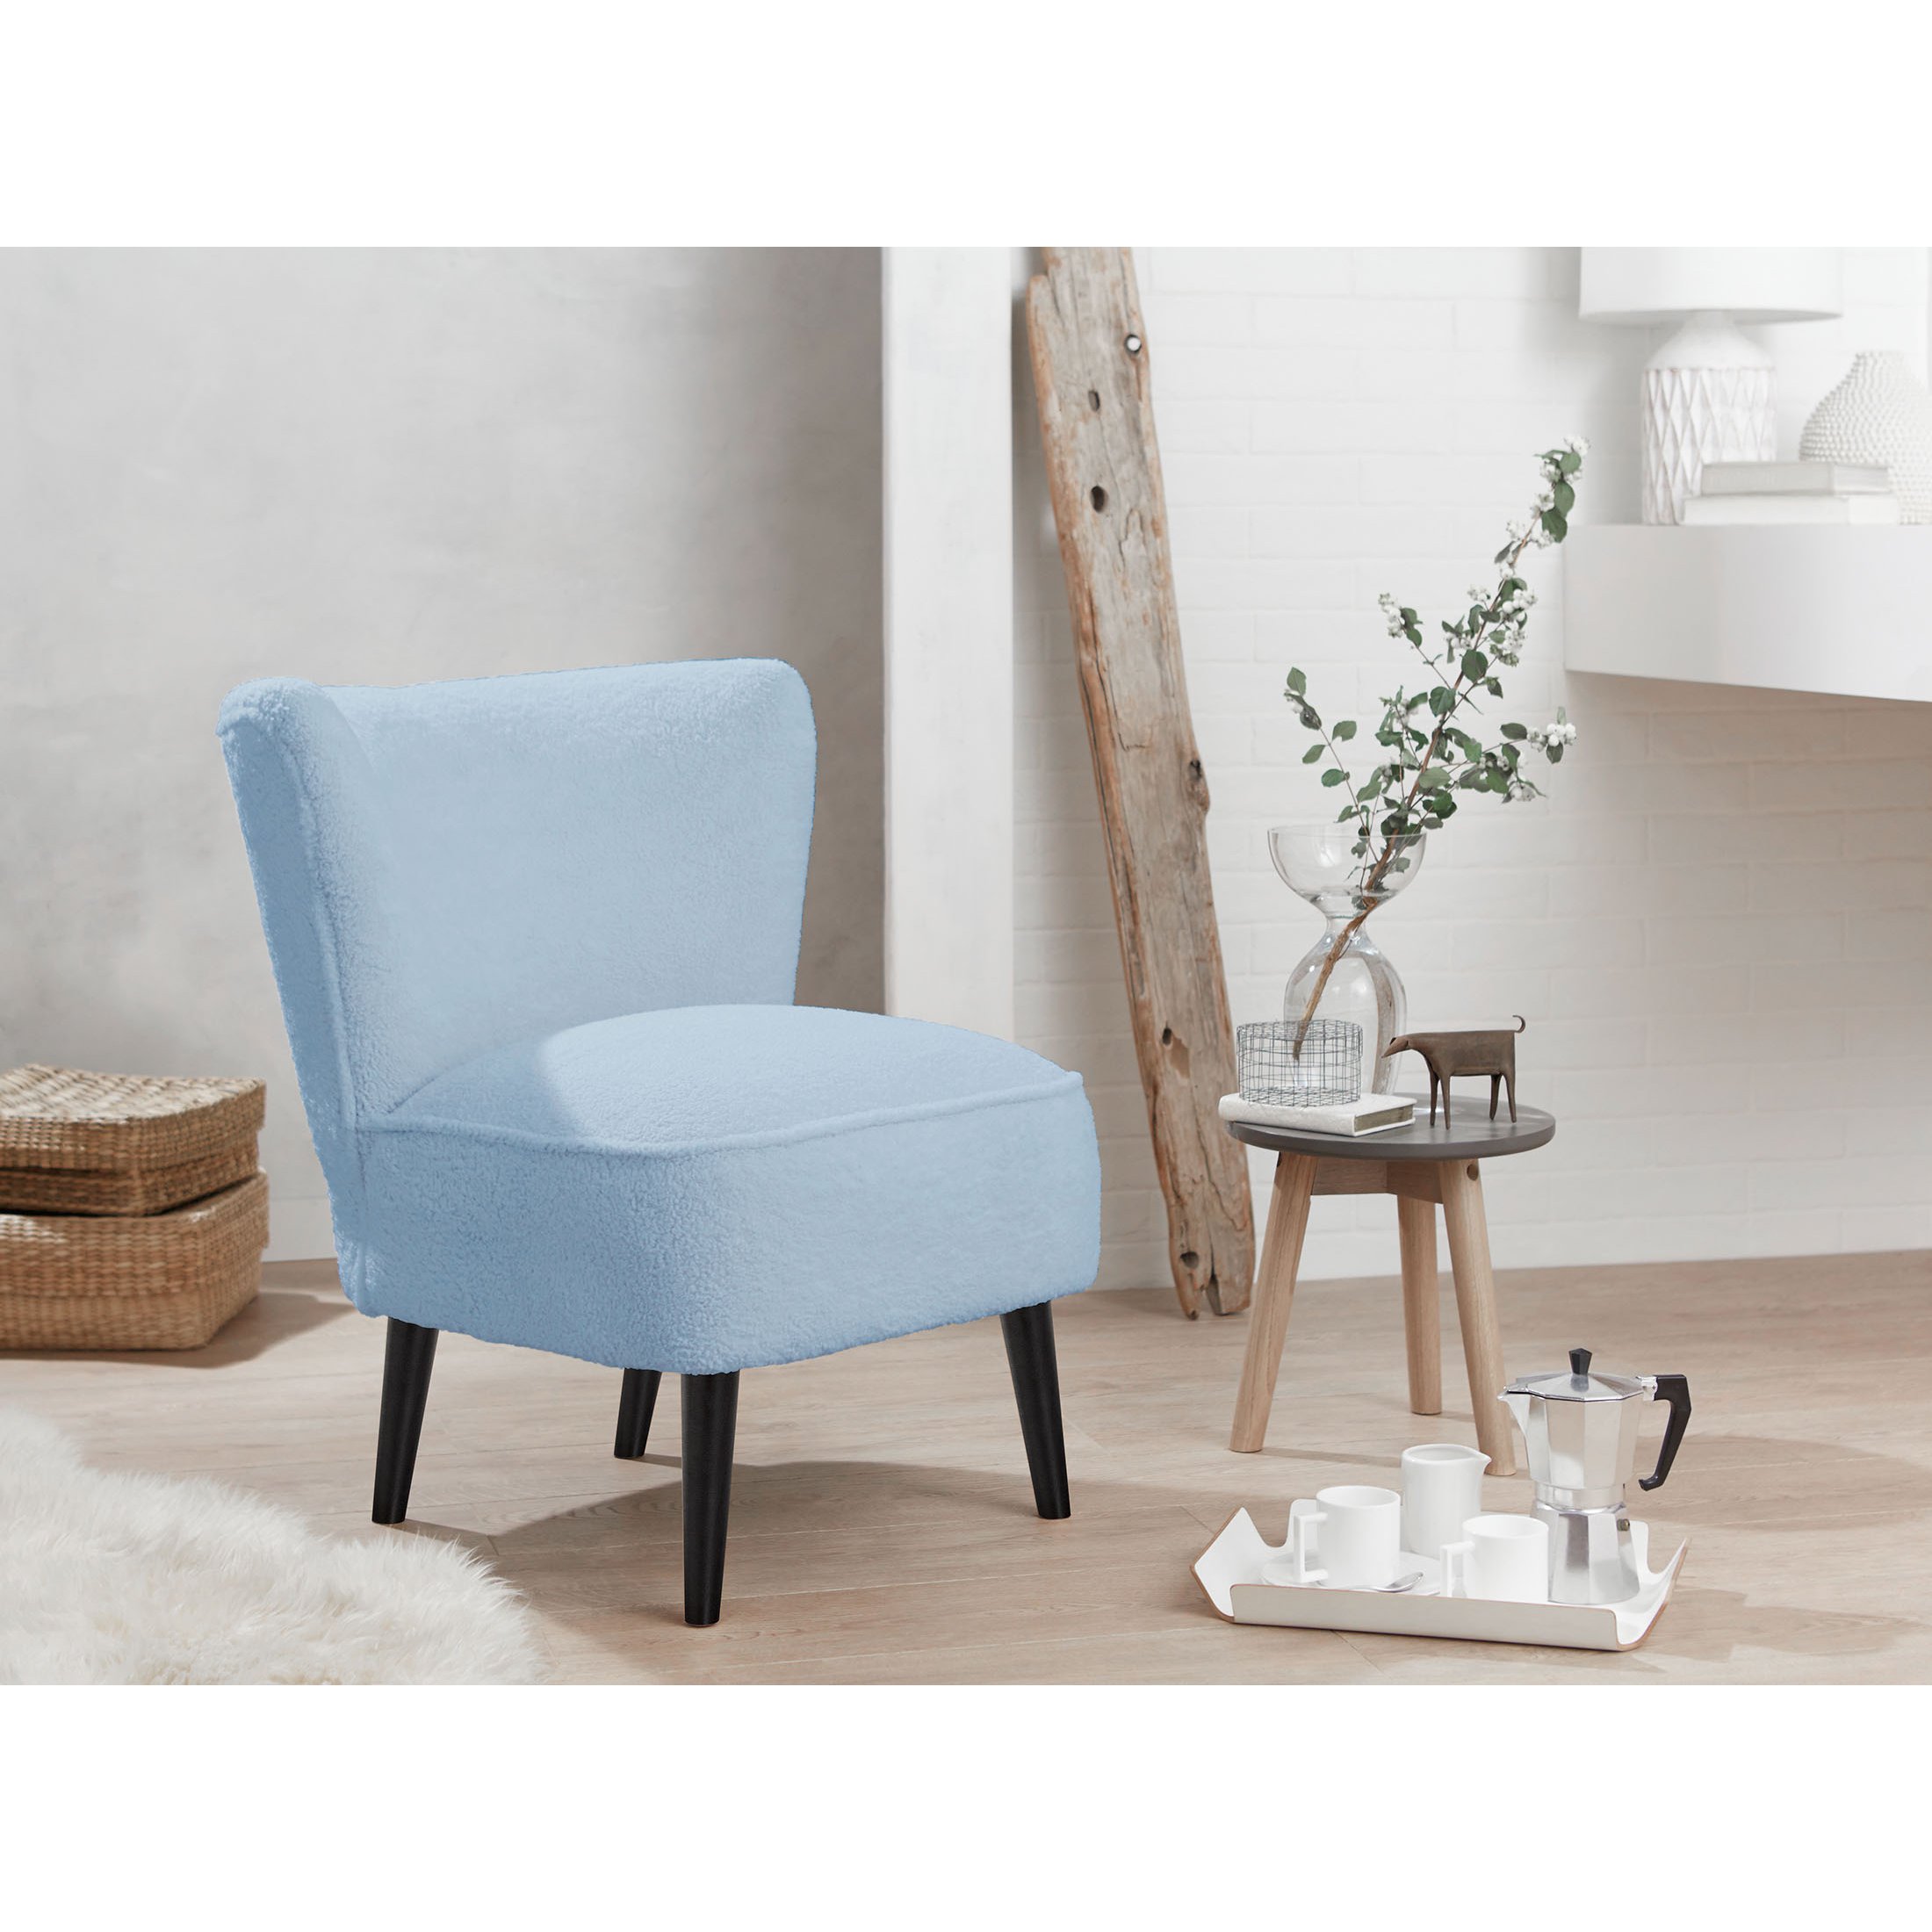 Malmesbury Boucle Accent chair Woolly Sky Blue with Black Legs